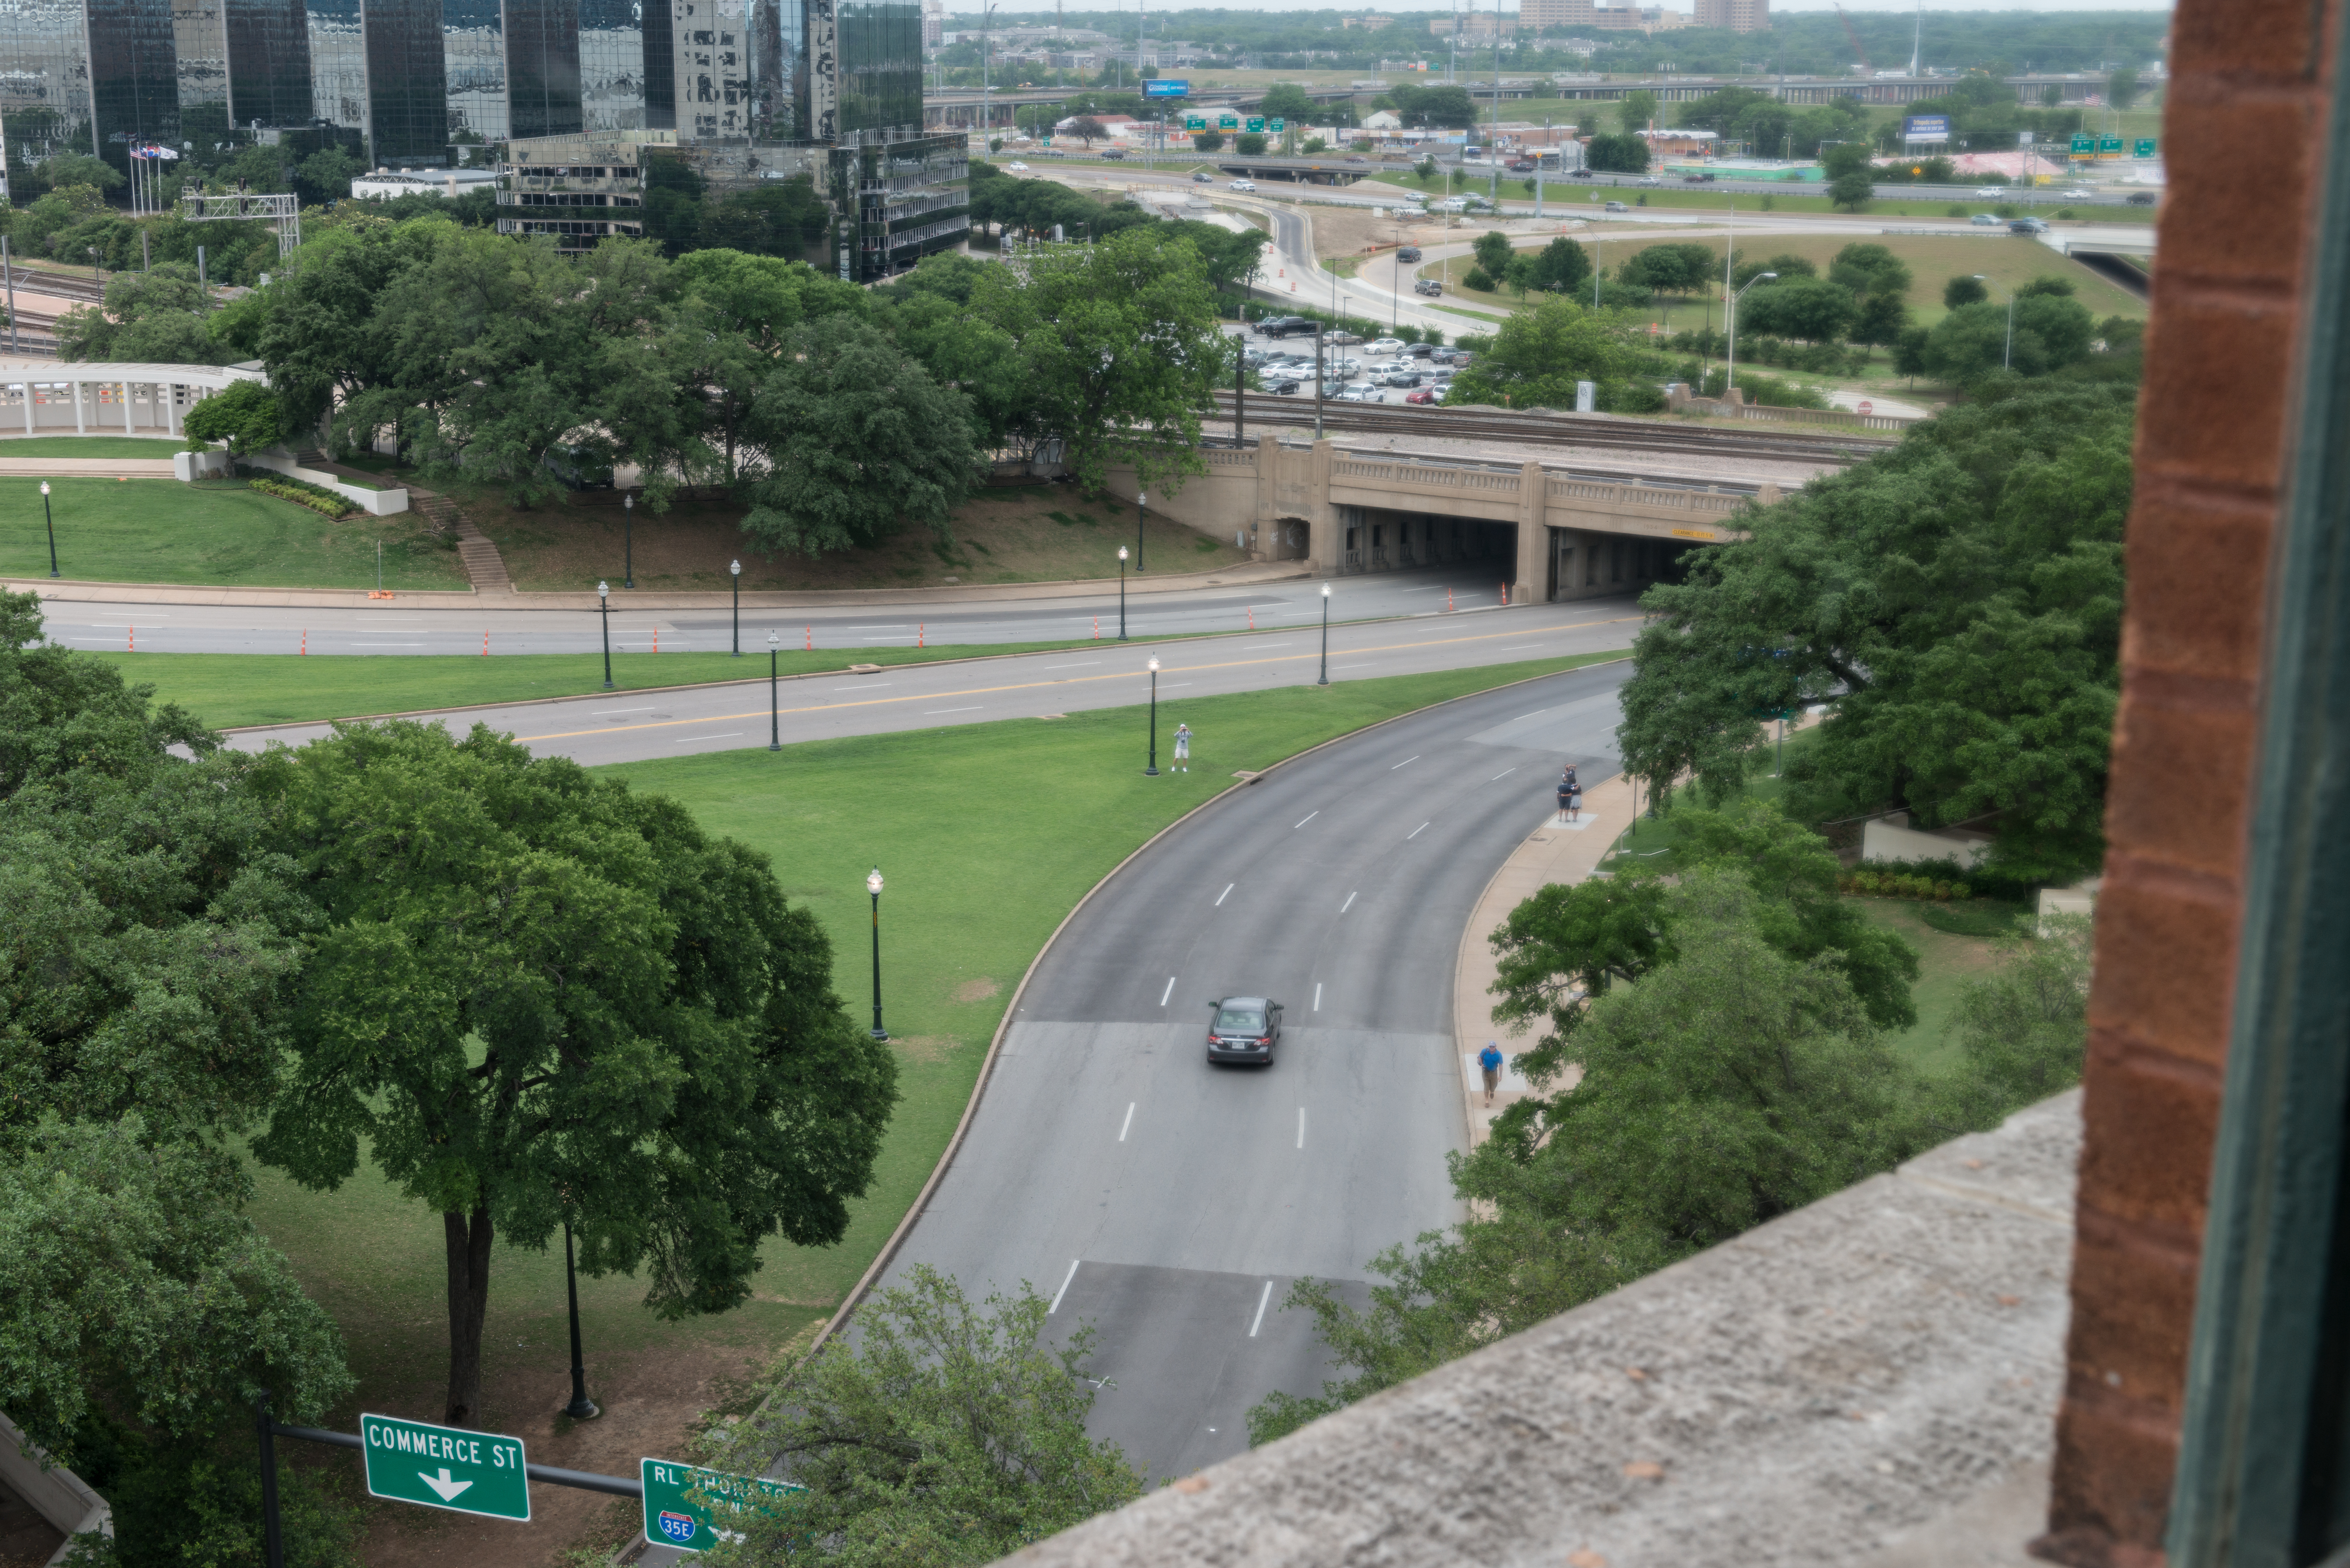 View, in 2014, of Dealey Plaza from a seventh-floor window of the Texas School Book Depository in Dallas, Texas